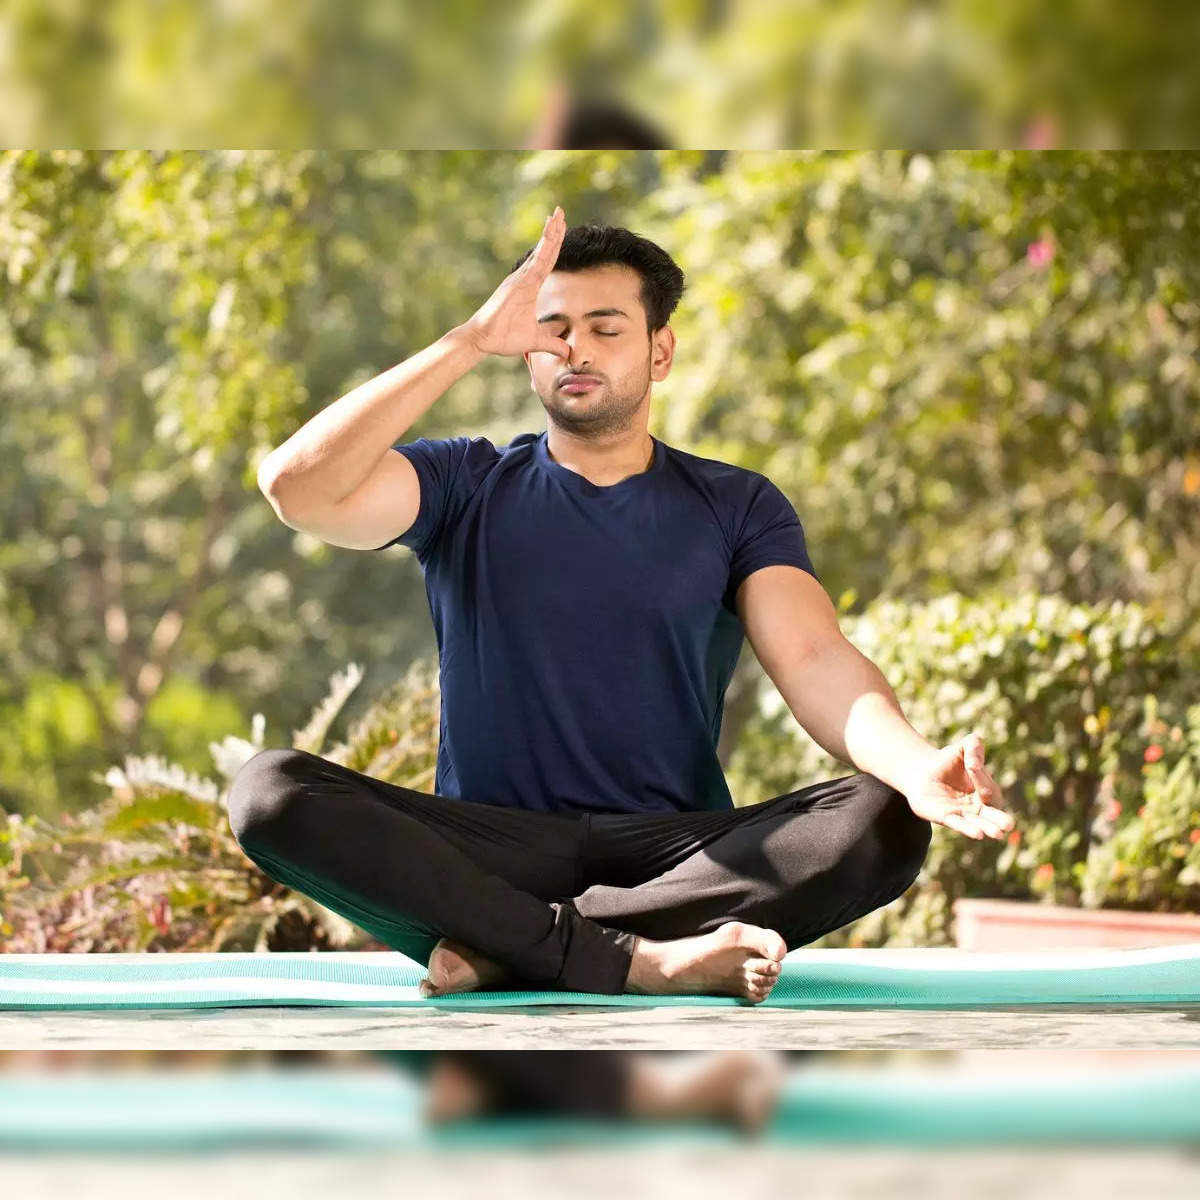 Yoga Poses for Men's Health & - Apps on Google Play